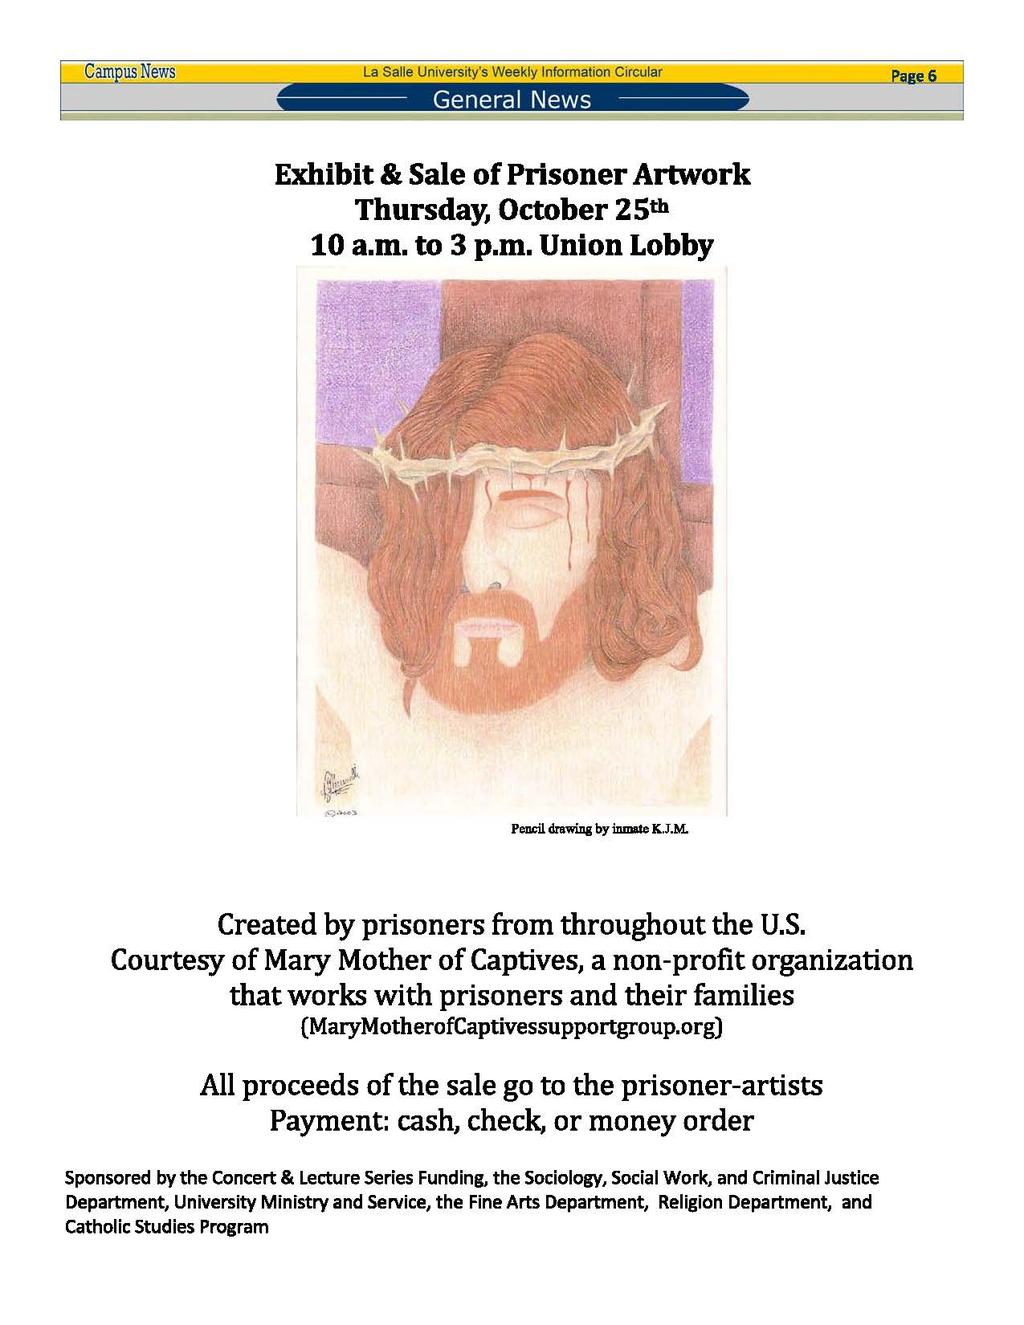 General News Exhibit & Sale of Prisoner Artwork Thursday, October 25th 10 a.m. to 3 p.m. Union Lobby Peudl clrawidg by inmate K.J.M. Created by prisoners from throughout the U.S. Courtesy of Mary Mother of Captives, a non-profit organization that works with prisoners and their families (MaryMotherofCaptivessupportgroup.